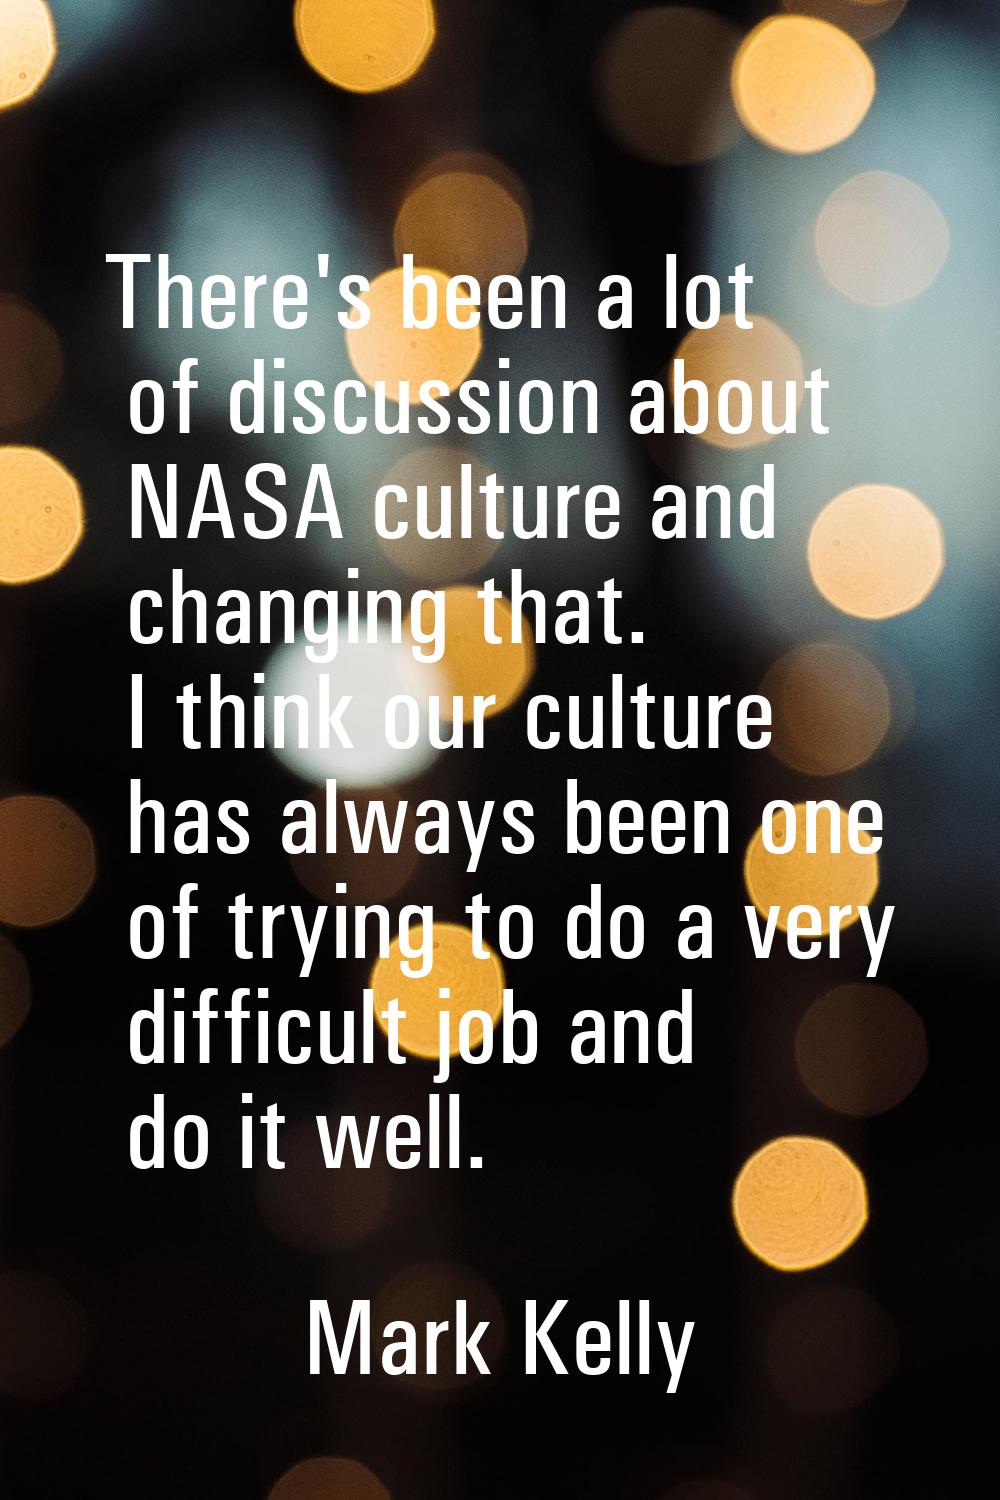 There's been a lot of discussion about NASA culture and changing that. I think our culture has alwa